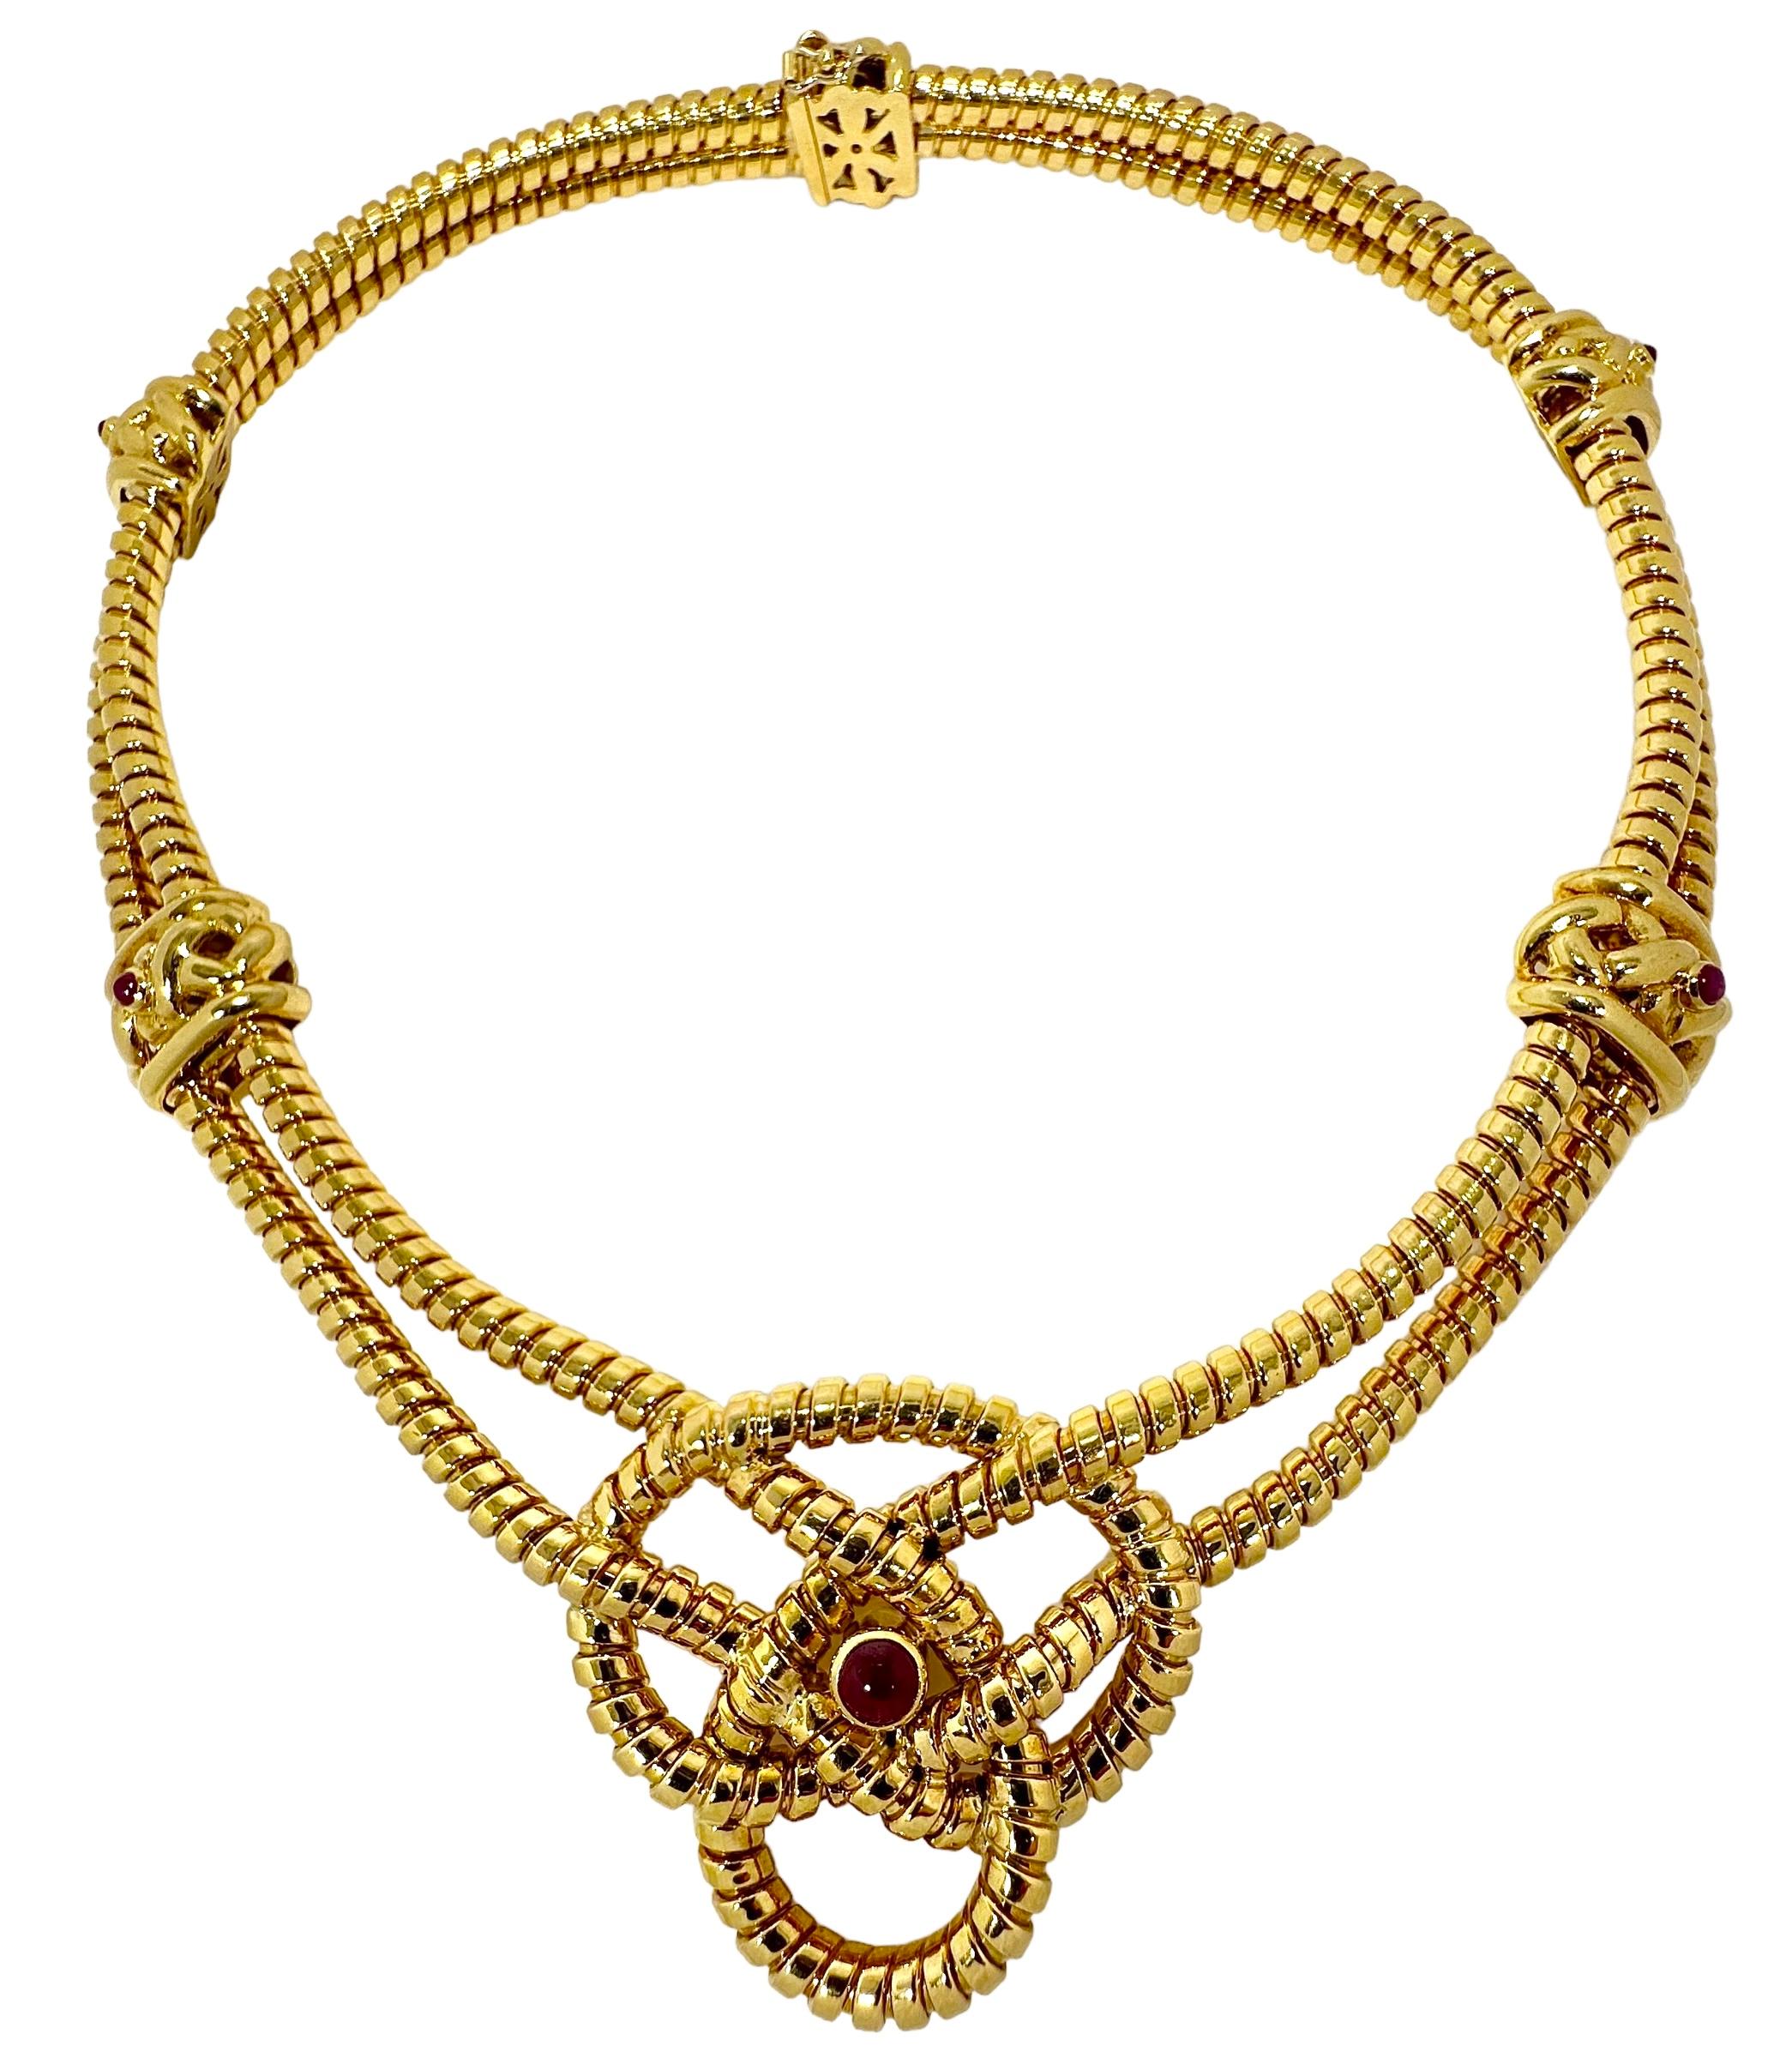 This imaginative, vintage 18k yellow gold Verdura double strand tubogas necklace bespeaks the elegance that the venerated house is respected for. Two 4.5mm tubogas lengths terminate at the front in an elaborate knot measuring 1 5/8 inch in diameter